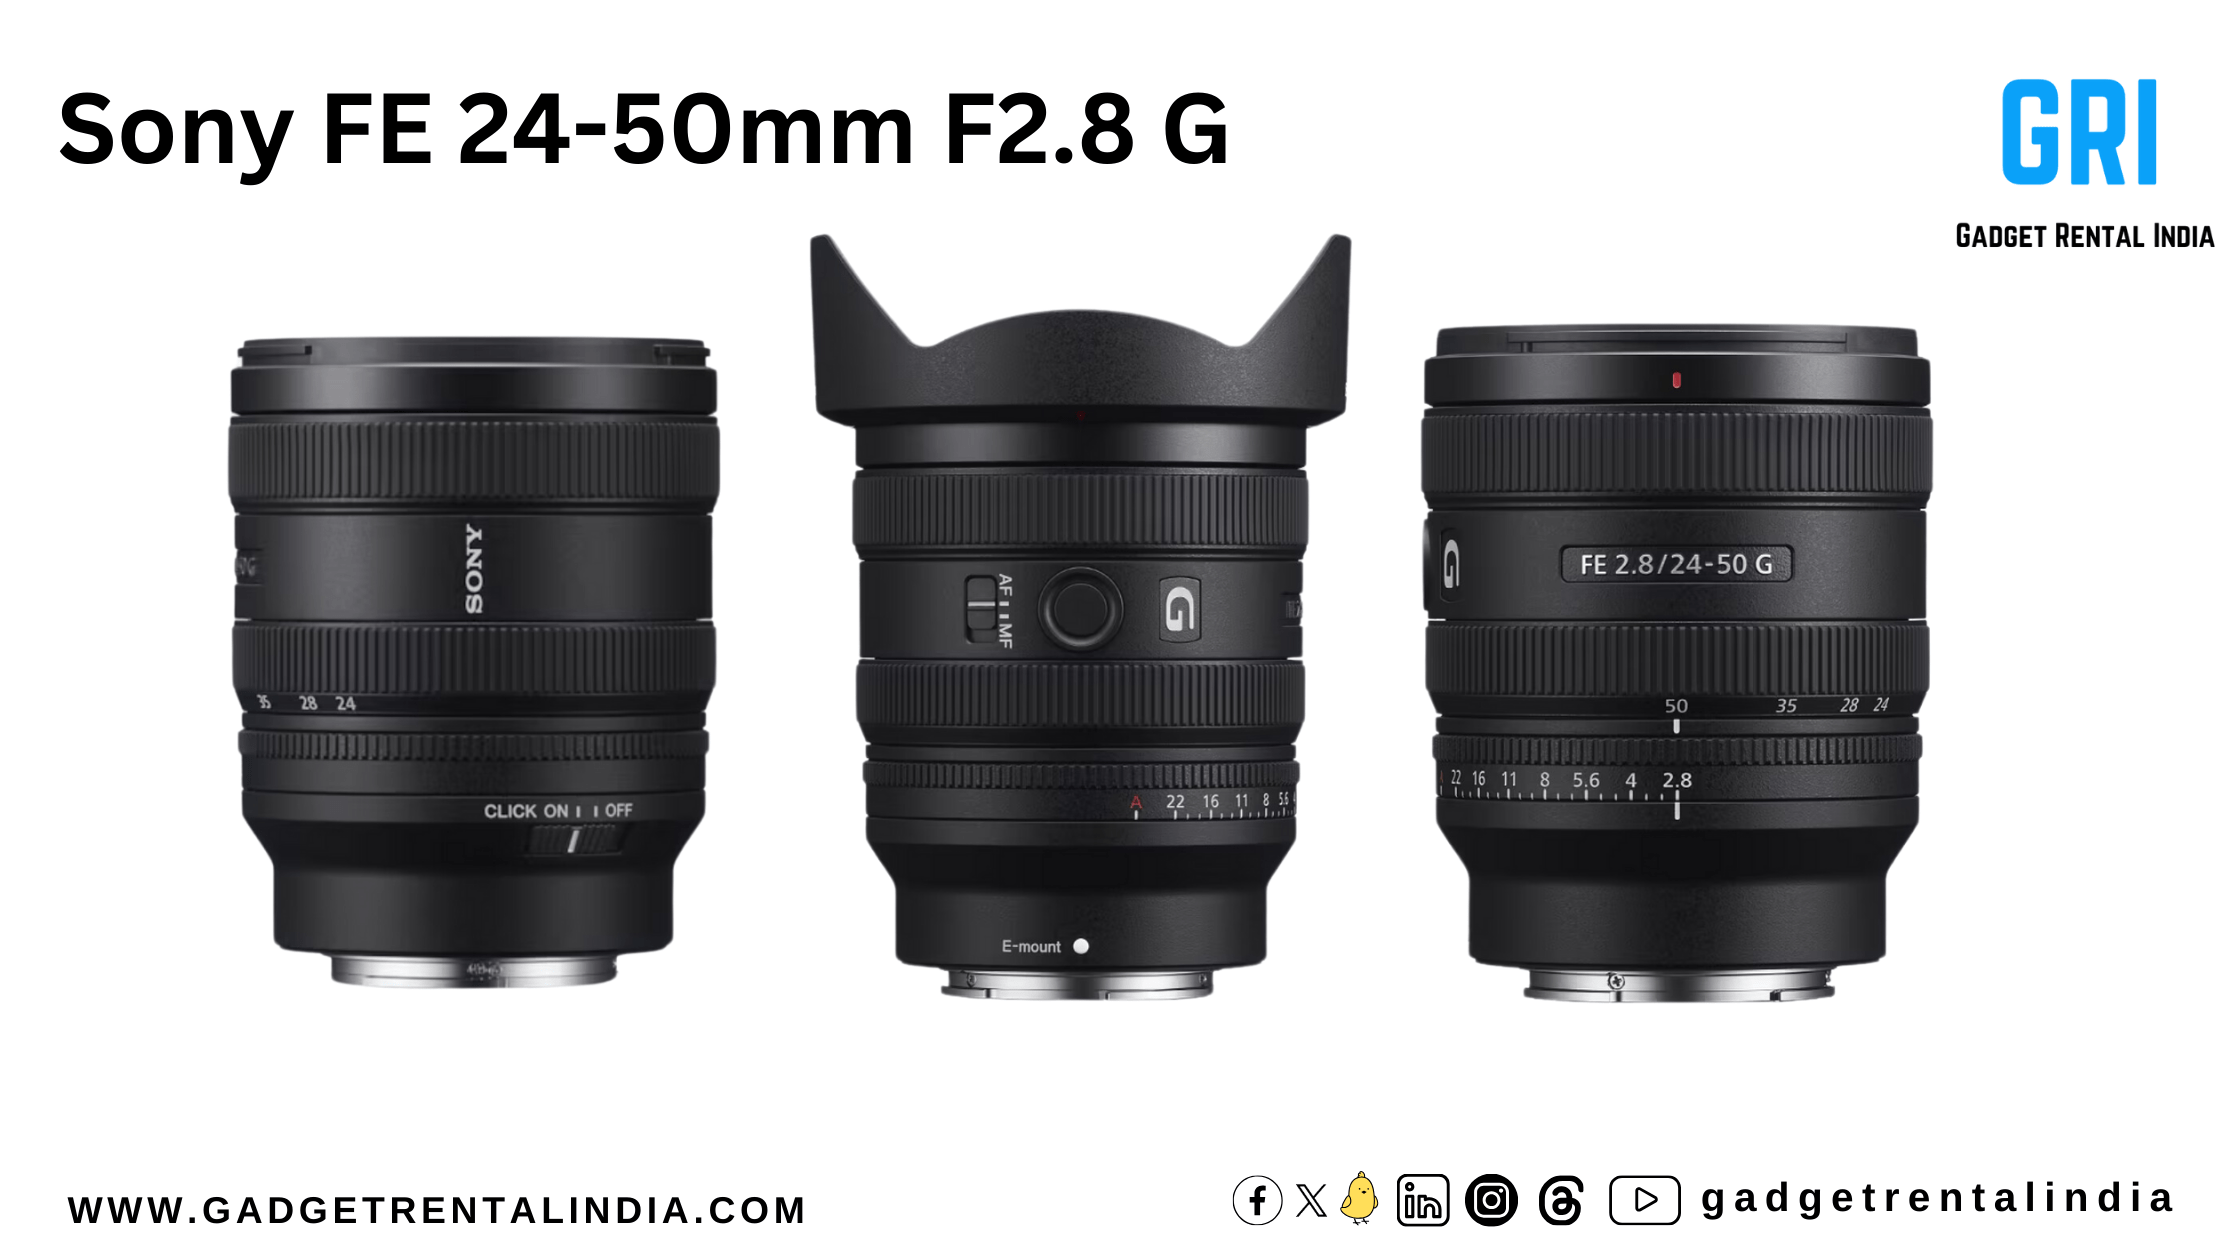 Sony Announces the FE 24-50mm F2.8 G Compact Lens | Gadget Rental India